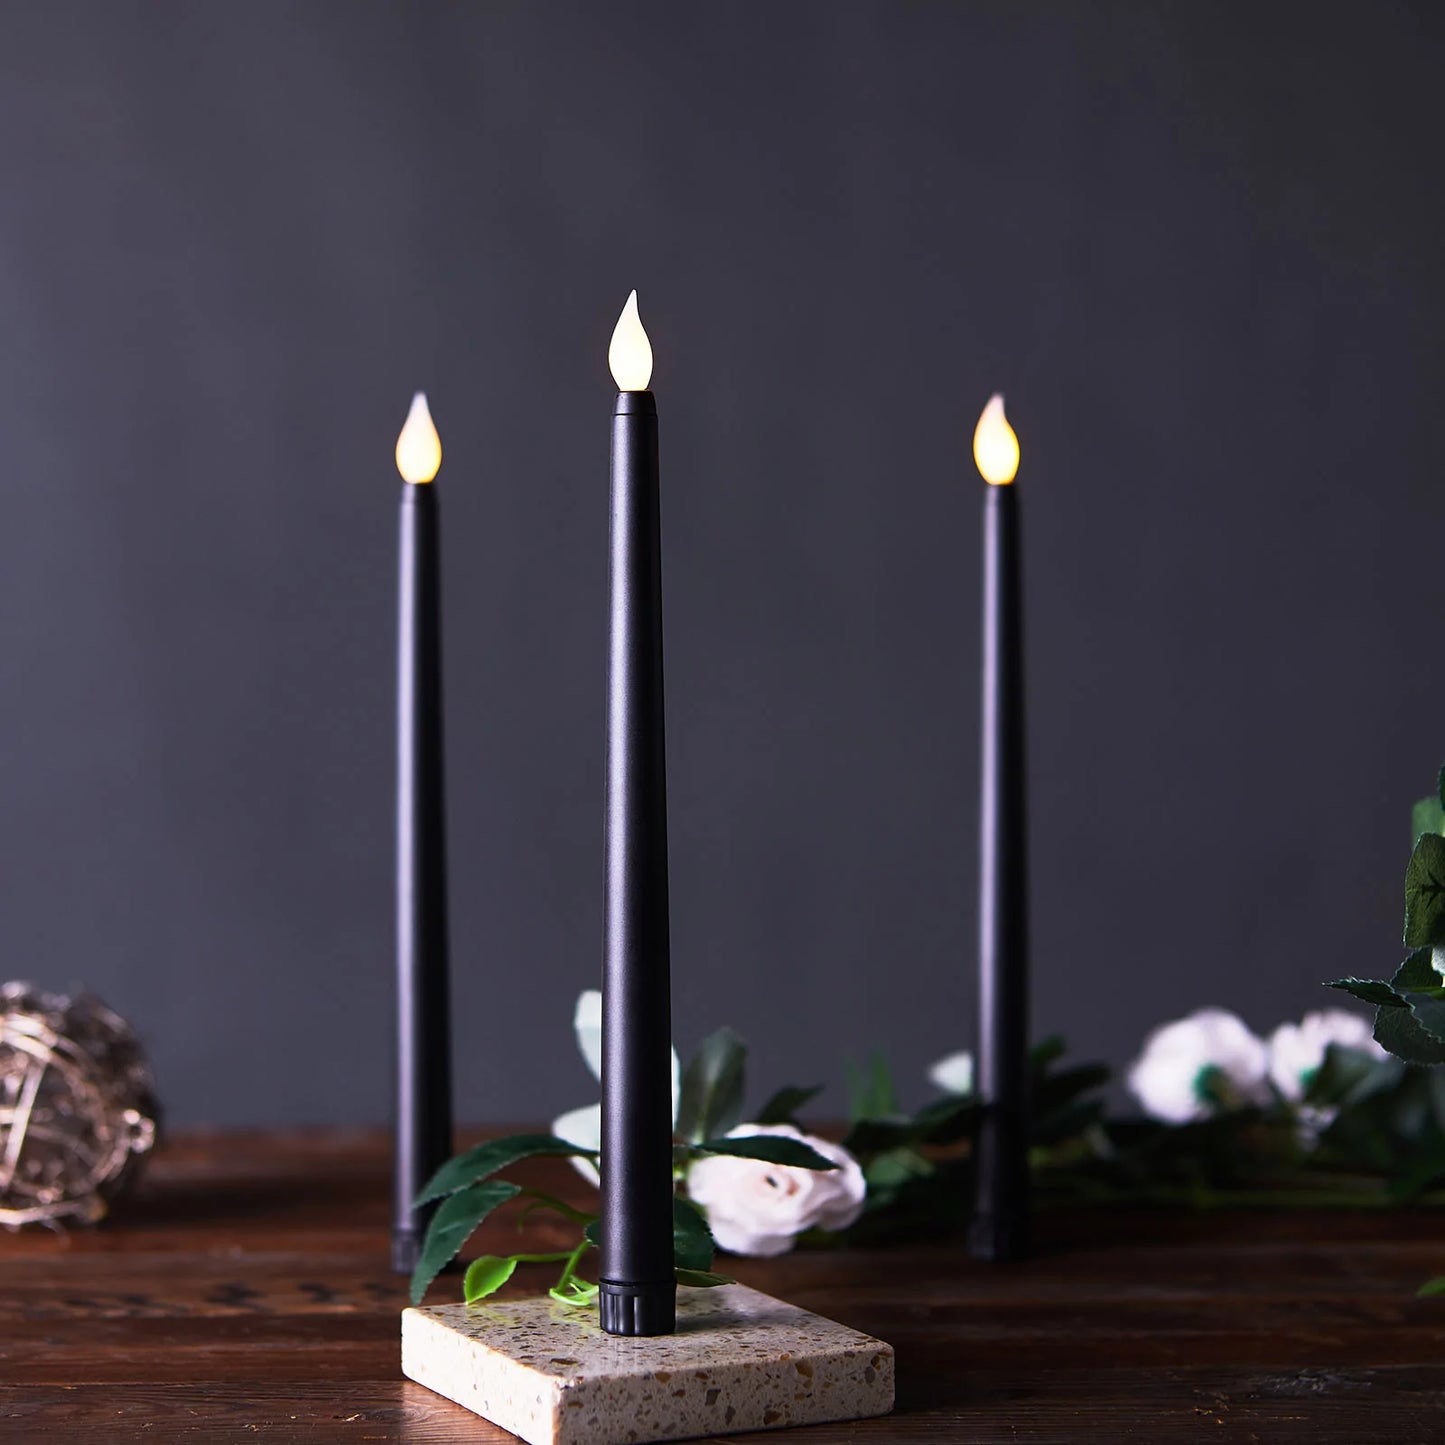 Flameless 11" Flickering Candle Rental